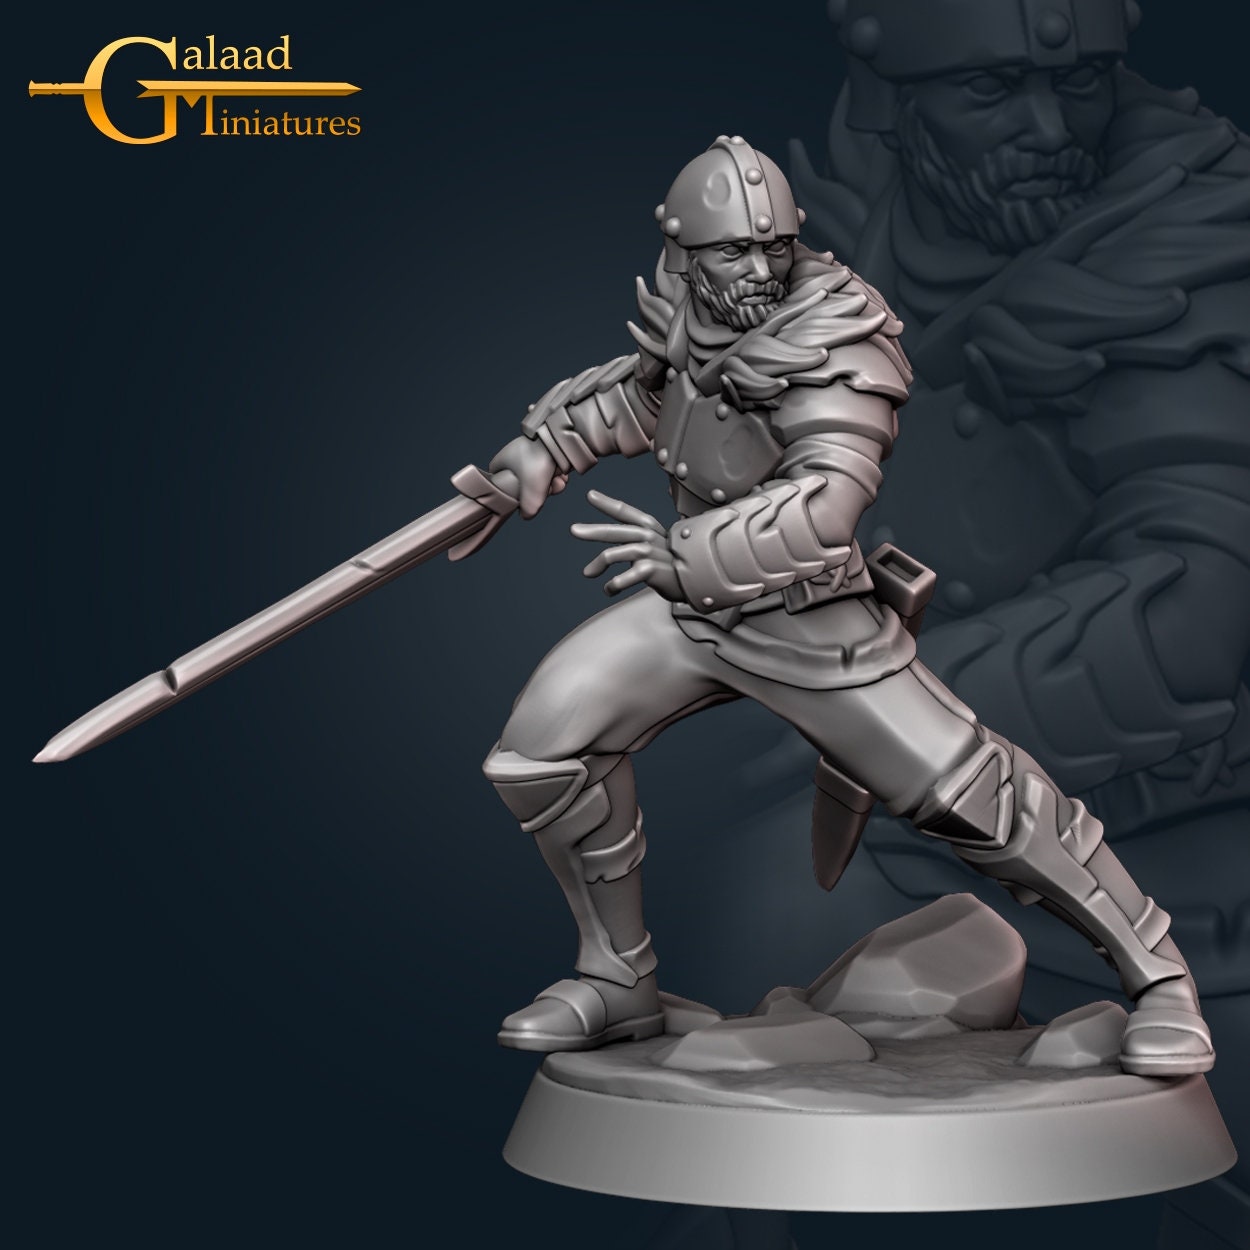 Male Human Fighter D&D miniature, by Galaad Miniatures // 3D Print on Demand / DnD / Pathfinder / RPG